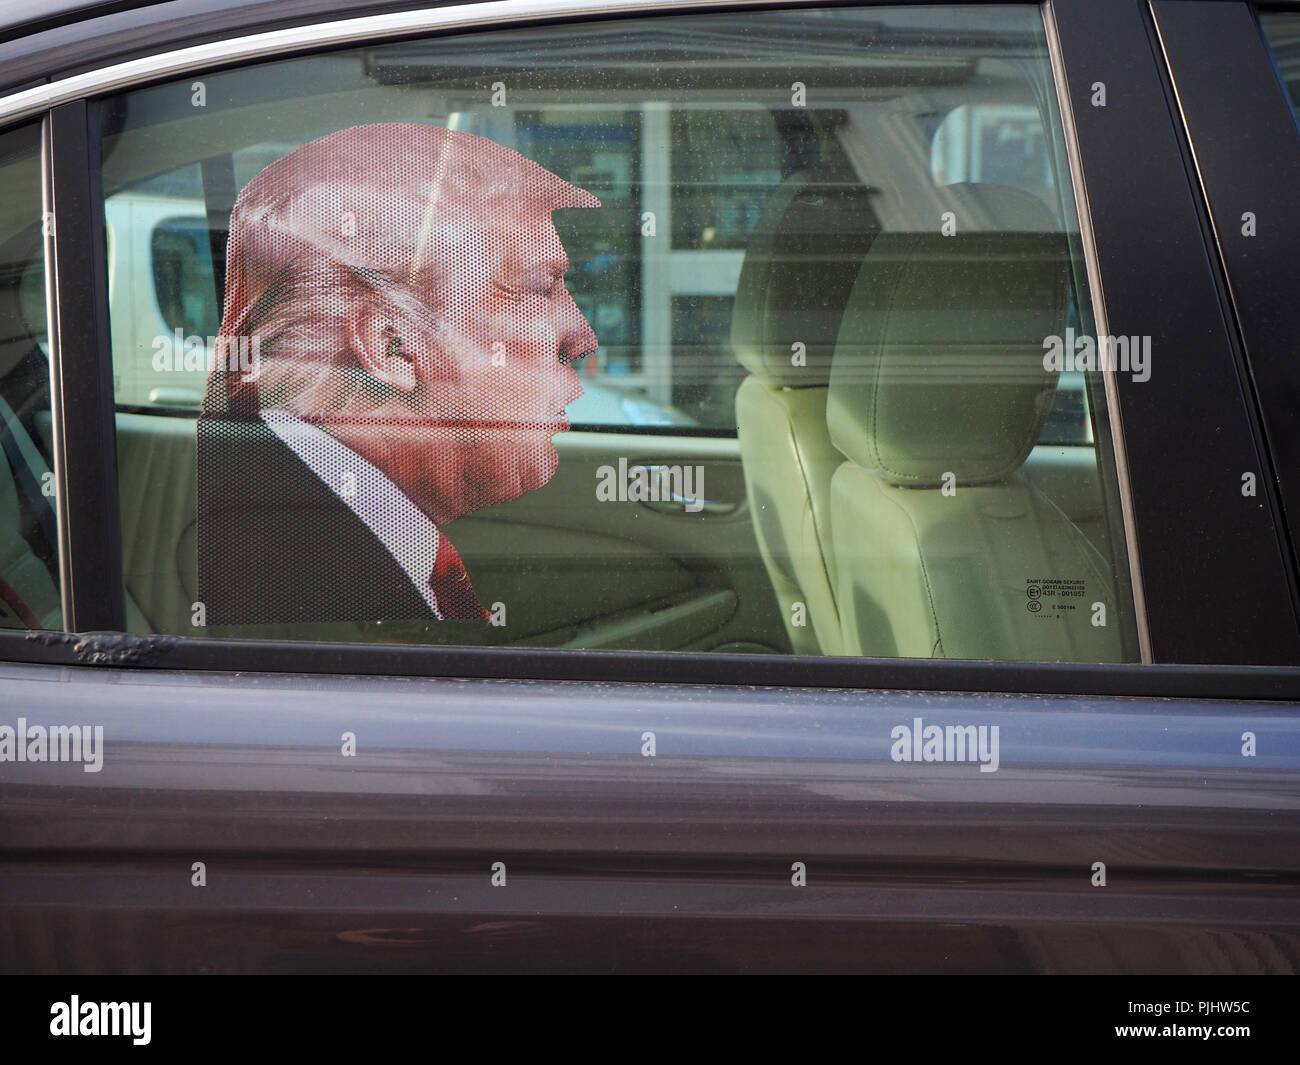 Donald Trump being chauffeured in the back of a car Stock Photo